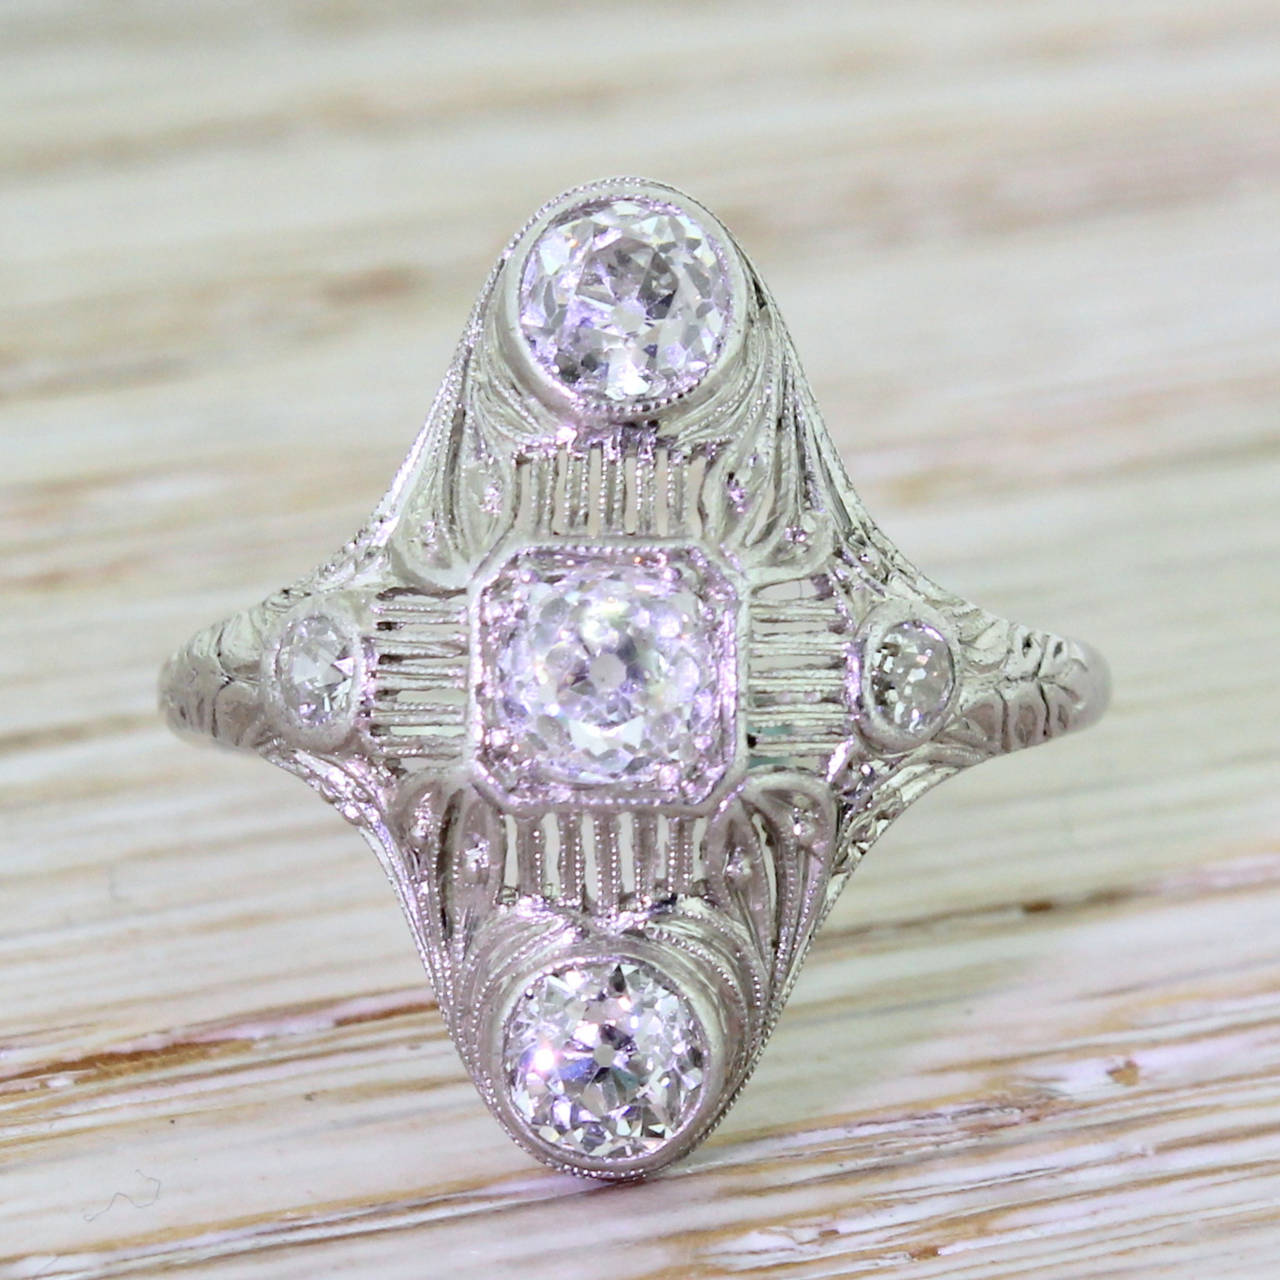 An irreplaceable wonder of a ring from one of the most important American jewellery maker’s of the early part of the 20th century. Five top grade diamonds are set within a geometrical formation that features some of the most intricate piercing and